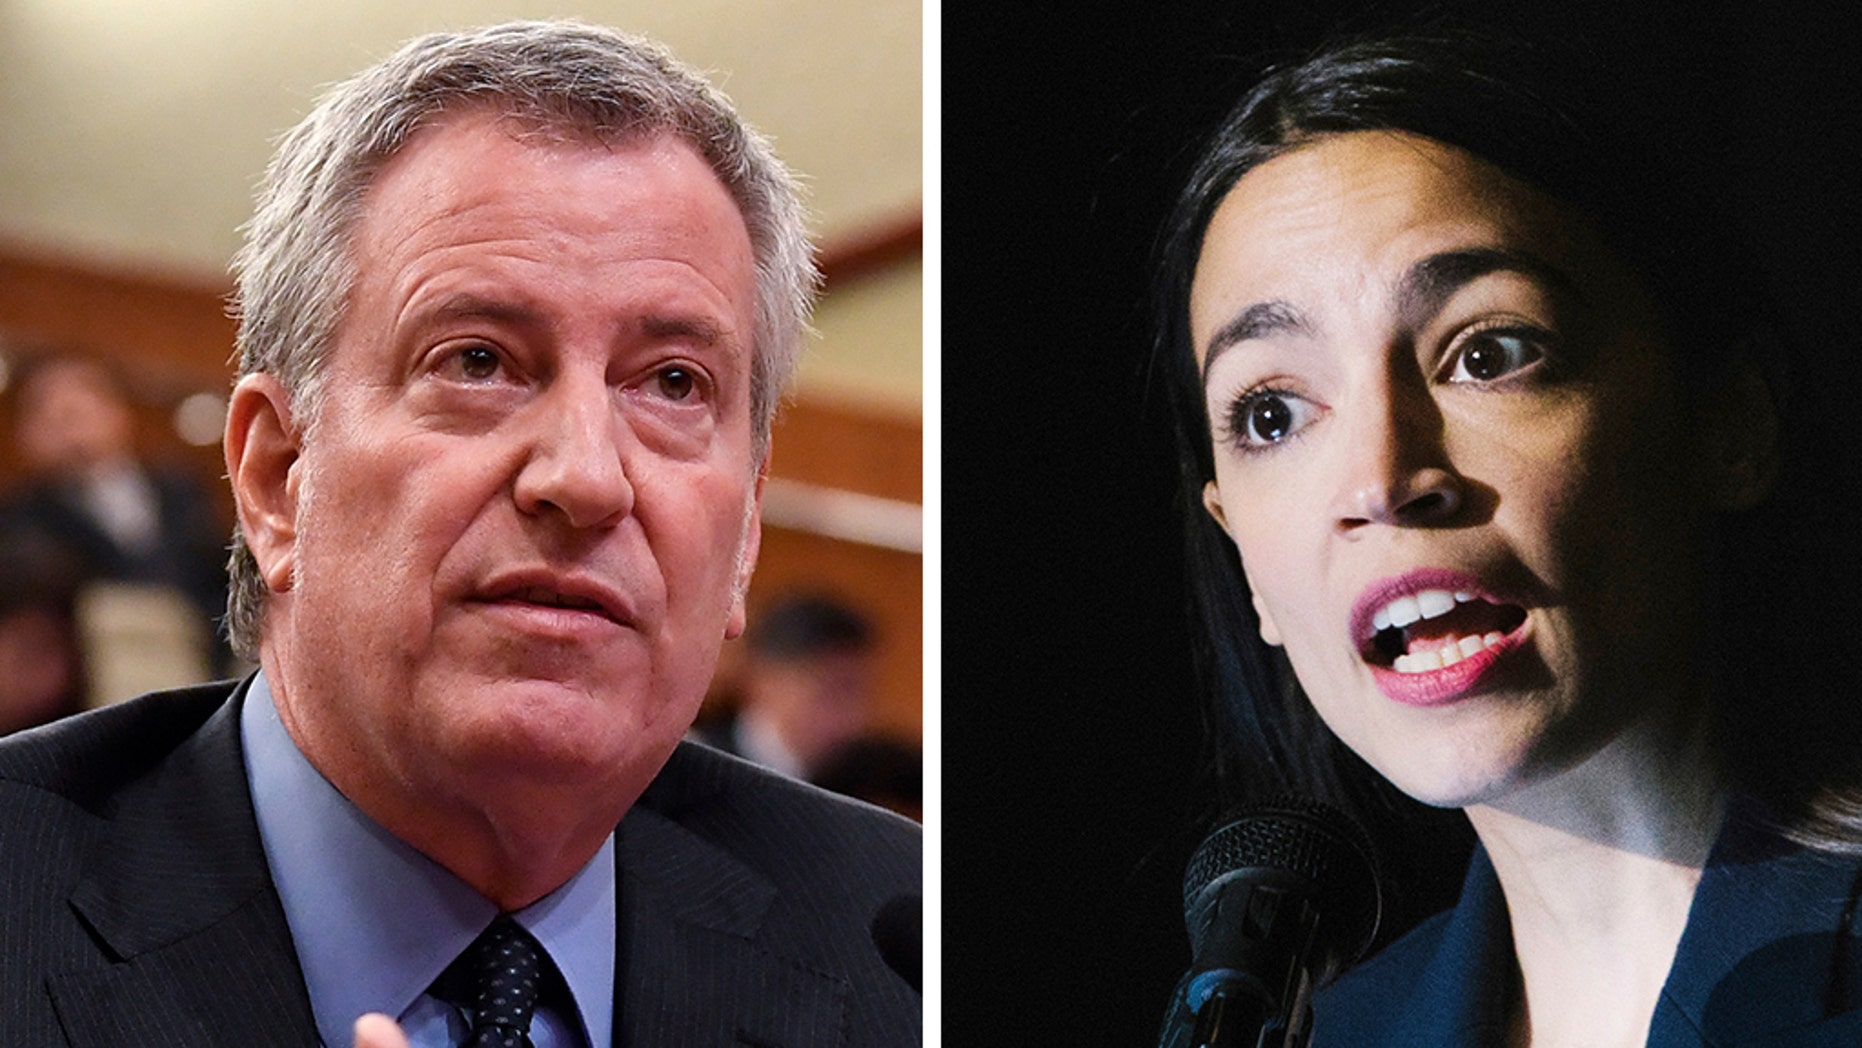 Mayor of New York City Bill de Blasio, left, said Sunday that the Democratic Republic of Alexandria, Ocasio-Cortez, was right to say that the collapse of the deal with the Amazon would release $ 3 billion to repair the city's subway and hire more teachers. (AP)